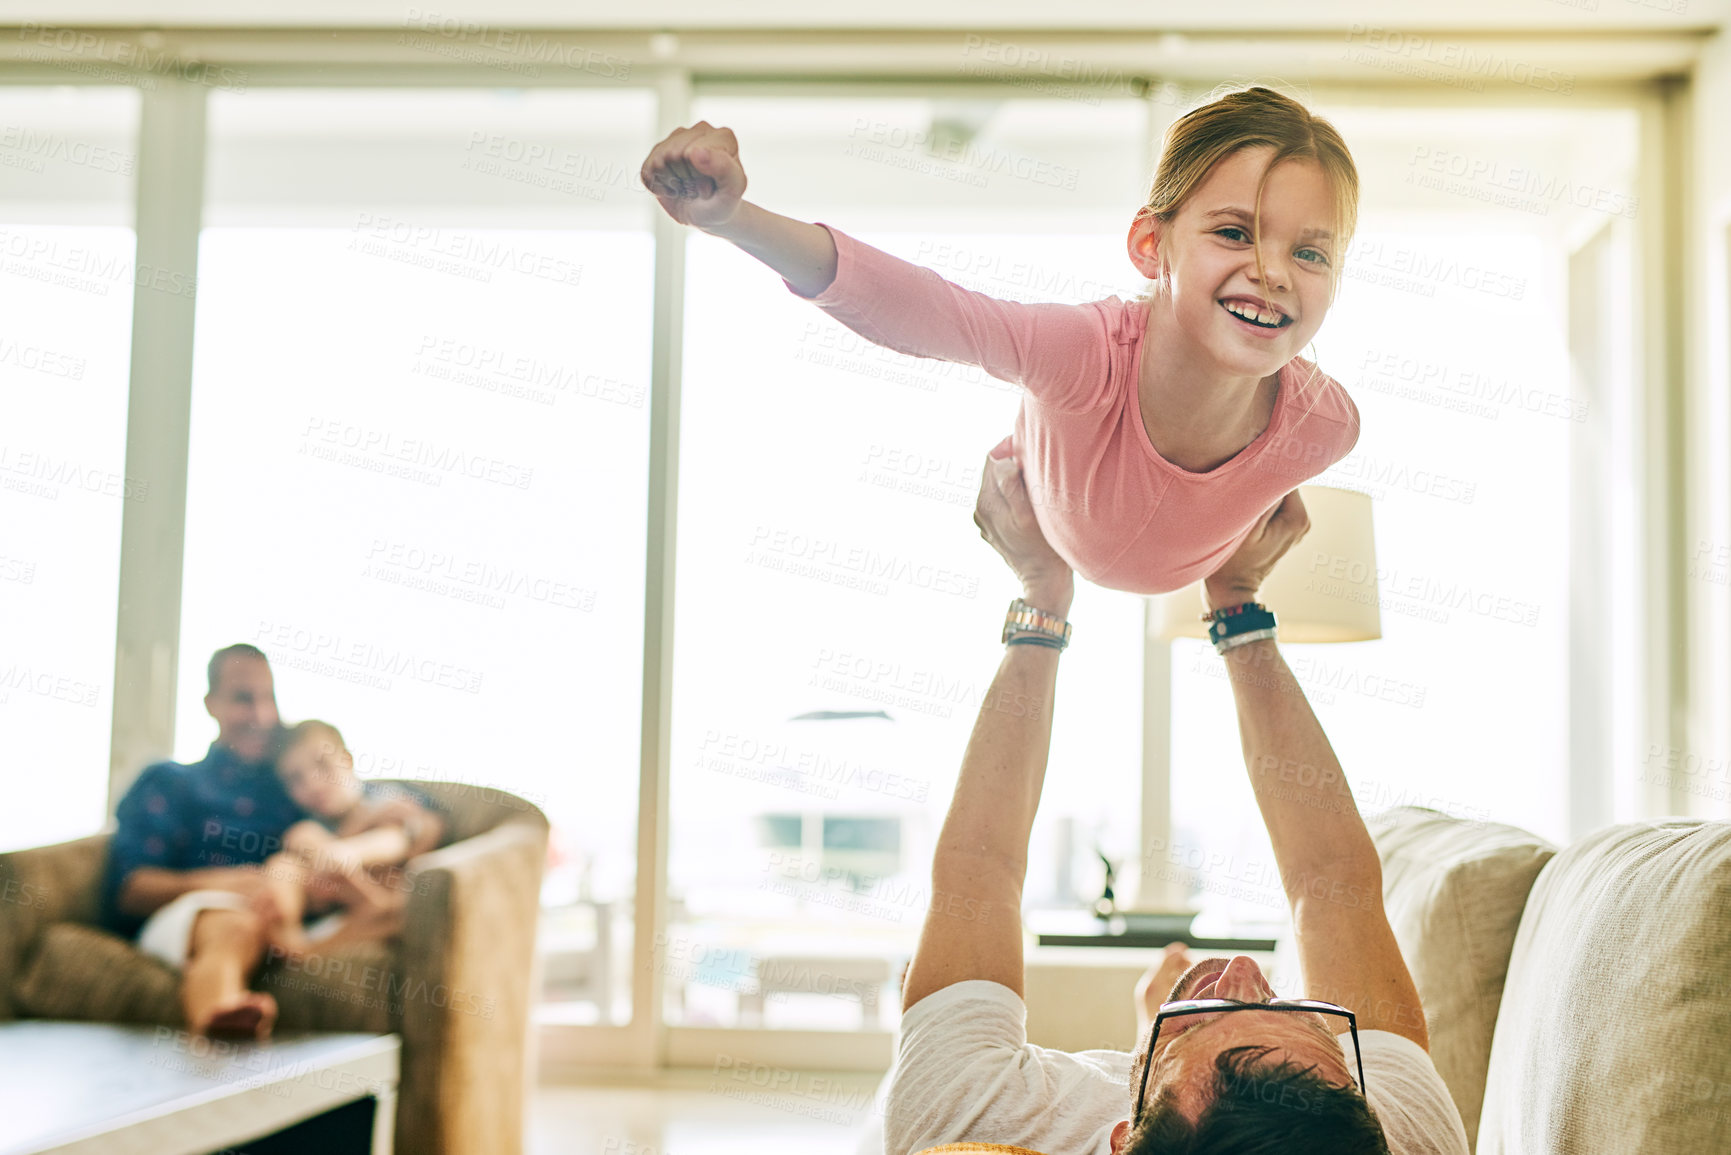 Buy stock photo Cropped portrait of an adorable little girl playing with her father at home